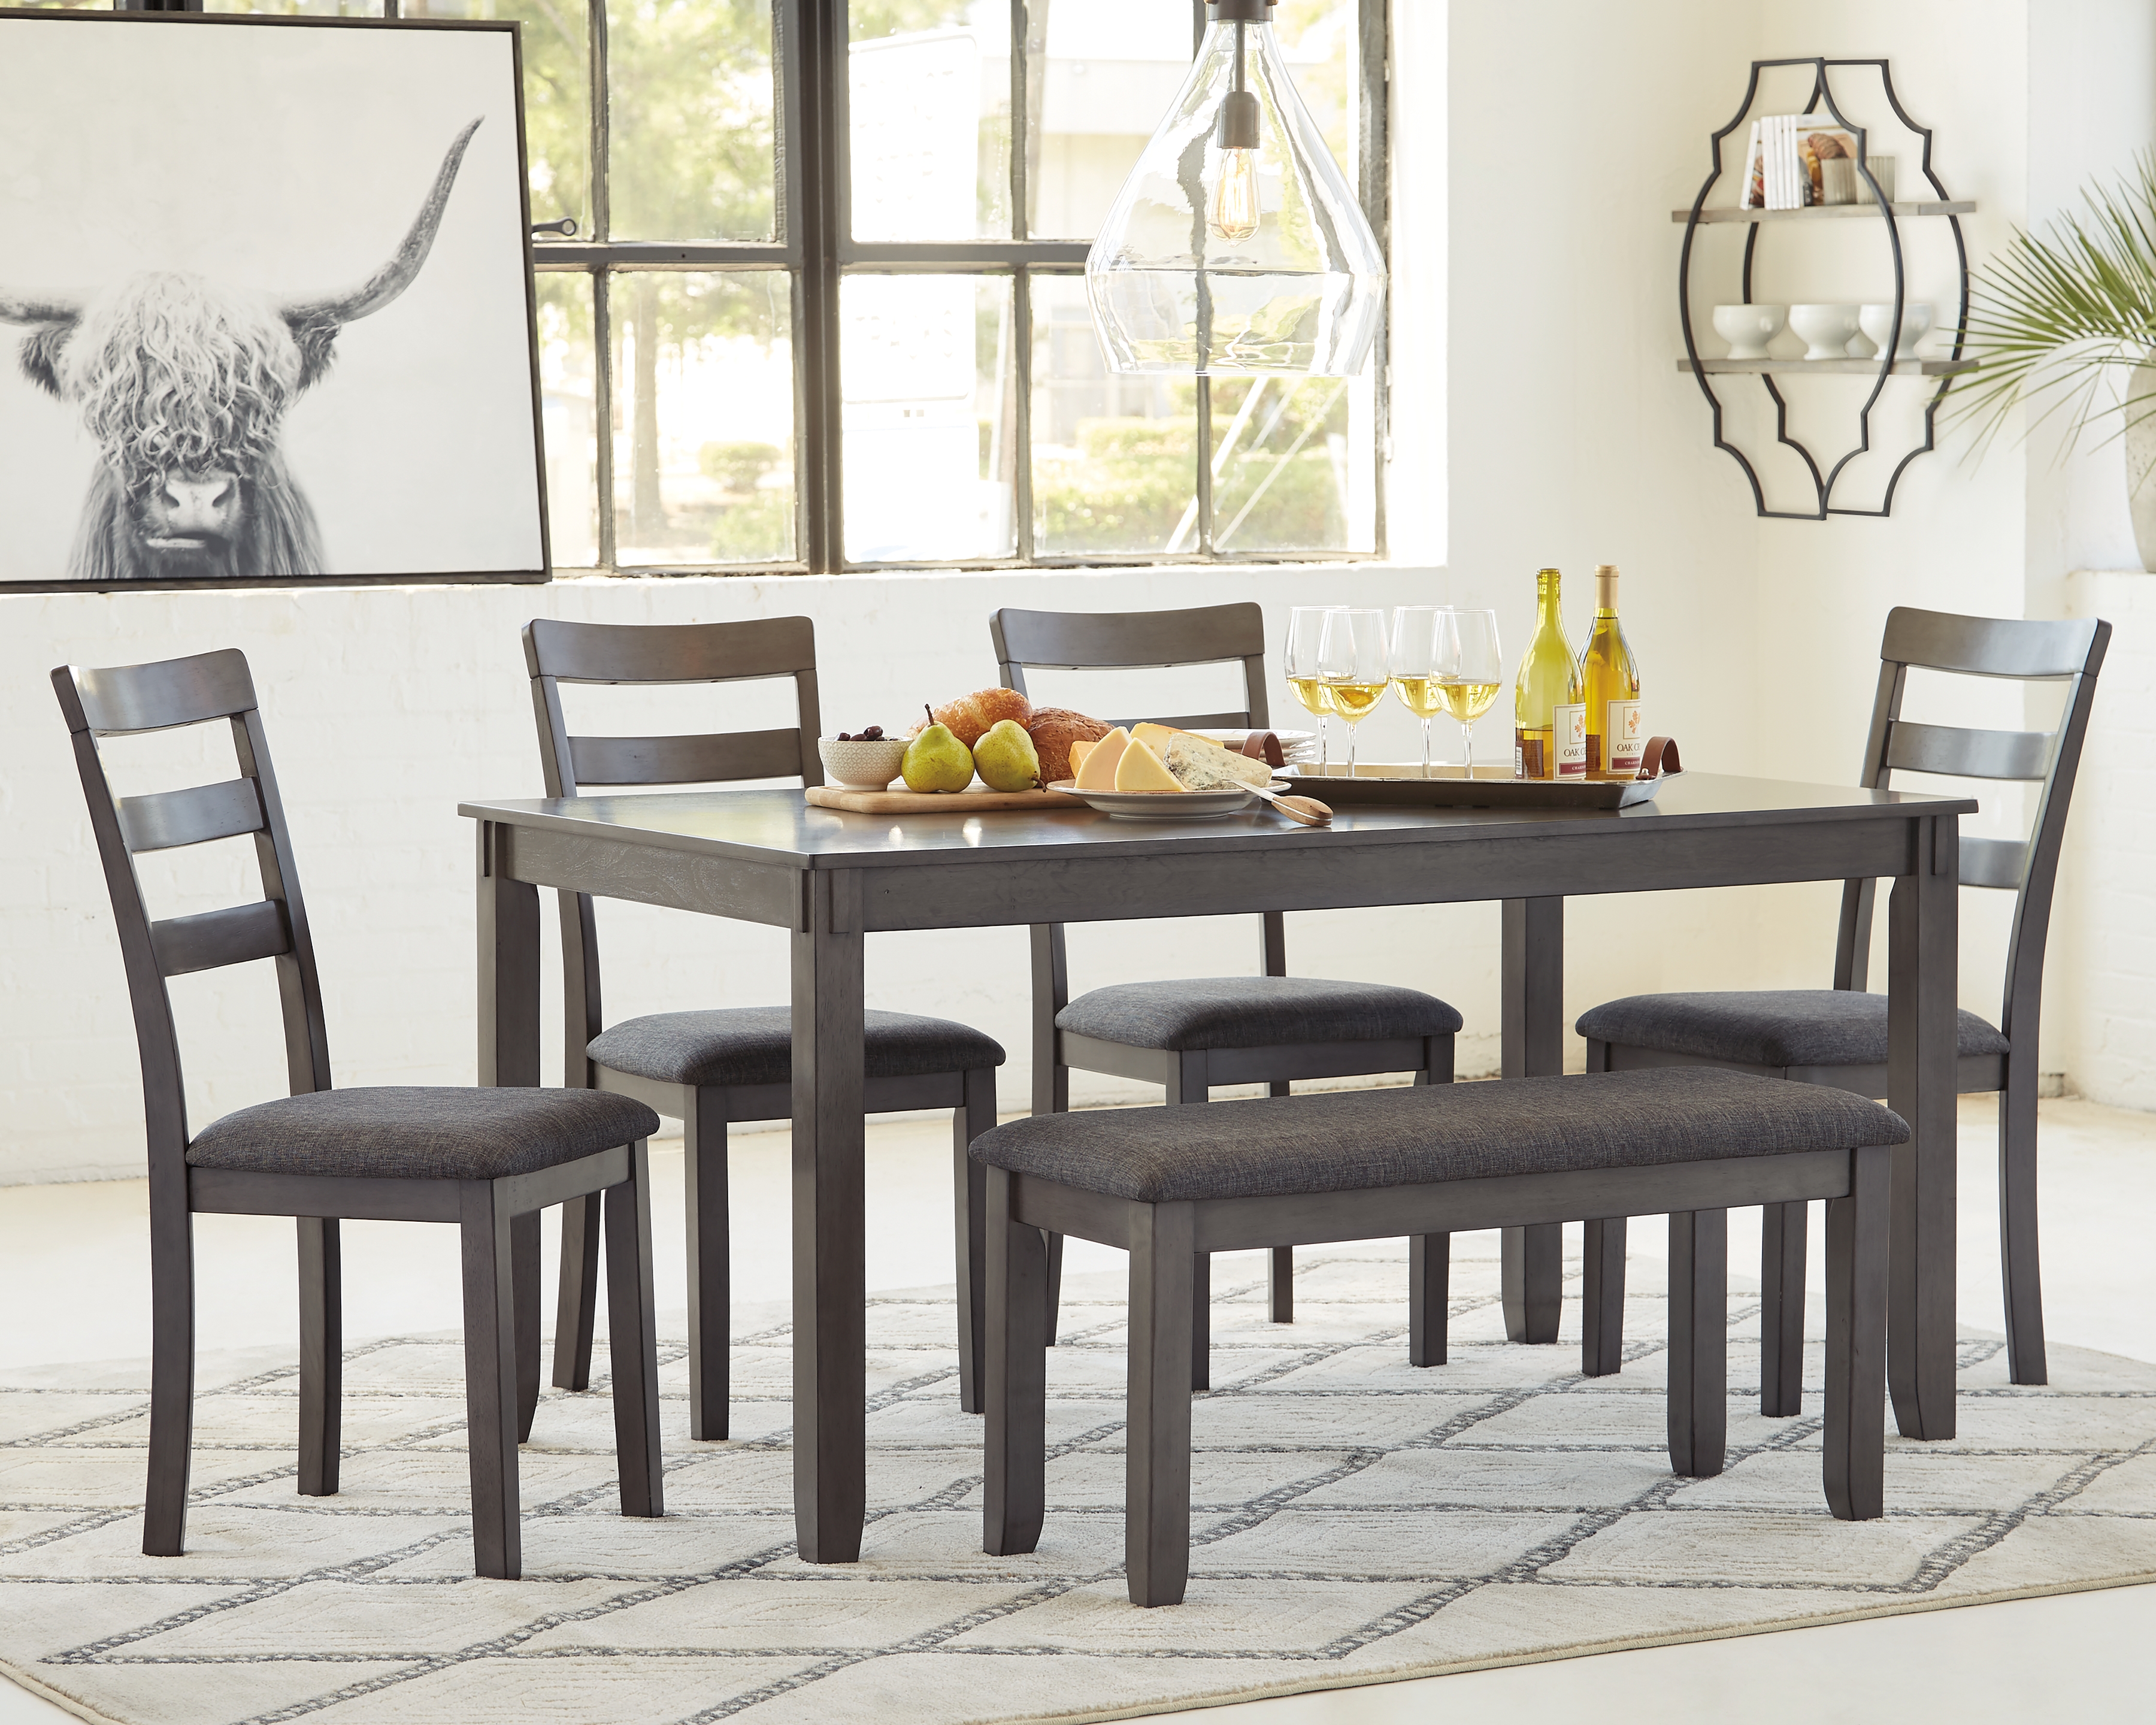 Bridson Dining Table And Chairs With, Dining Room Table And Chairs With Bench Set Of 6